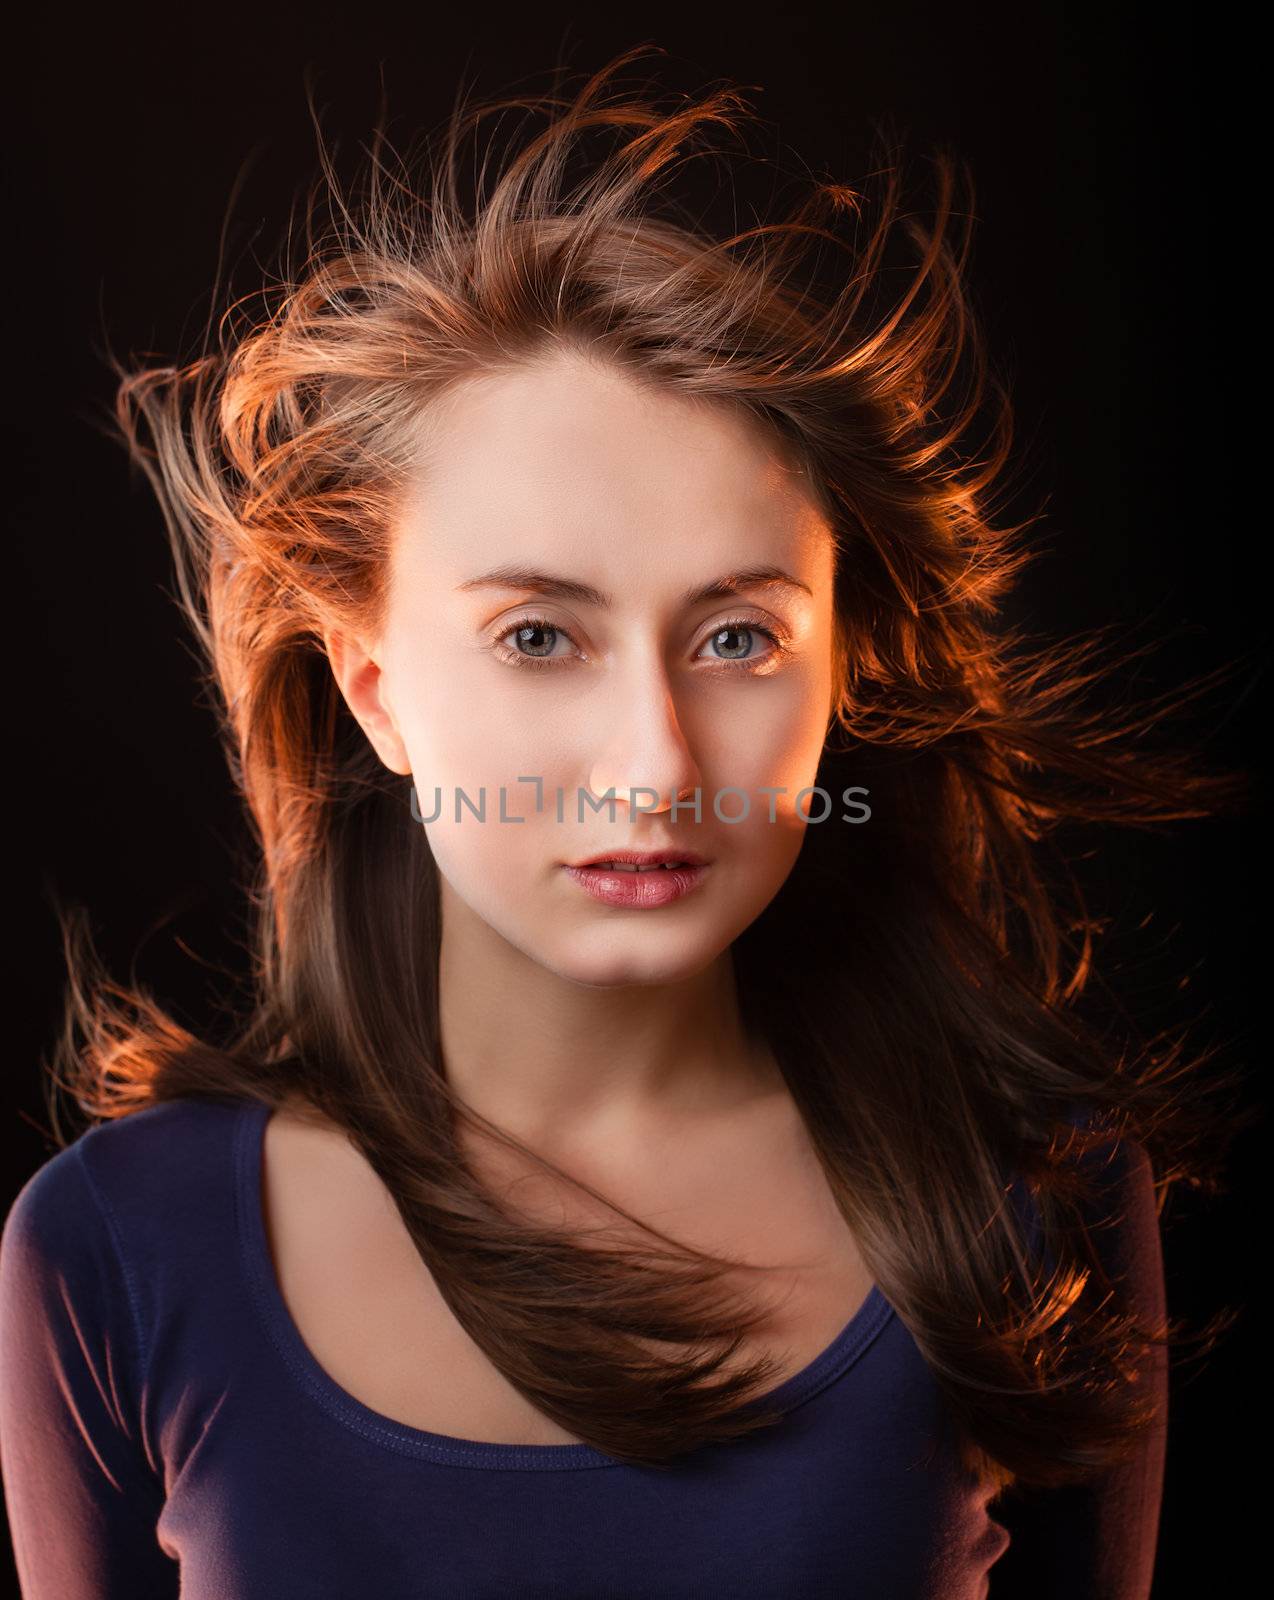 Portrait of a beautiful young woman on a dark background